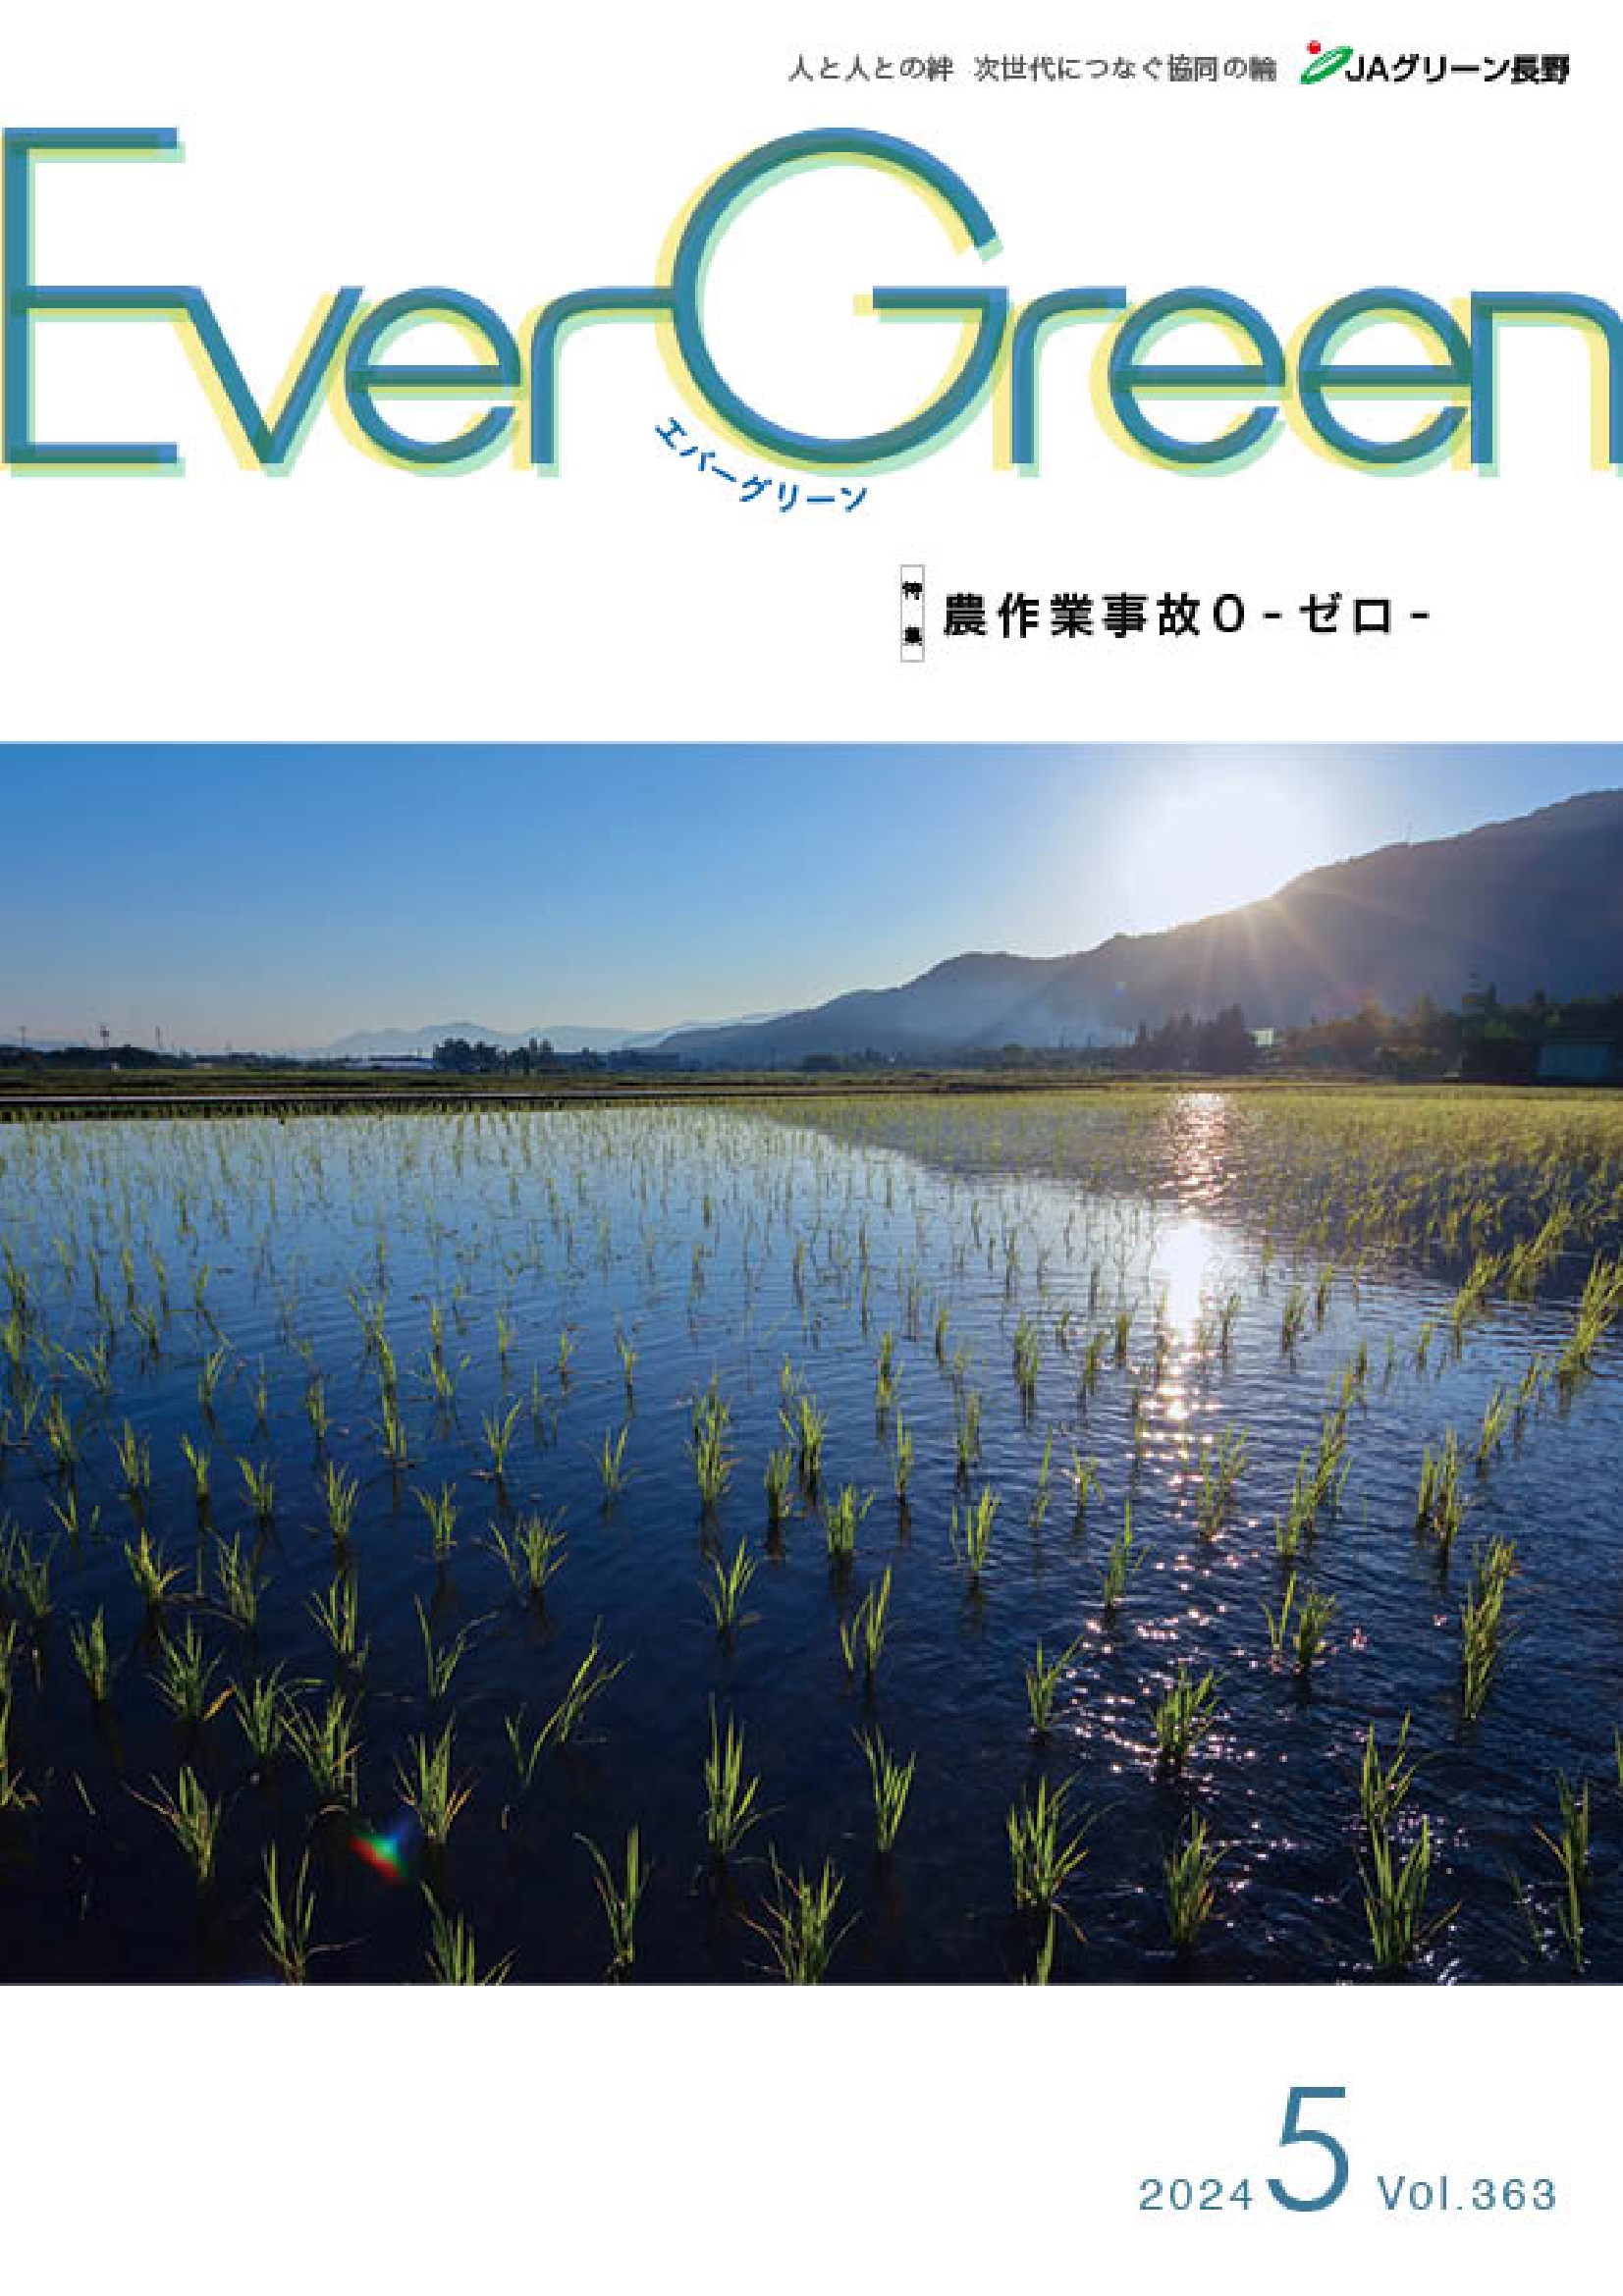 Ever Green５月号発行のご案内